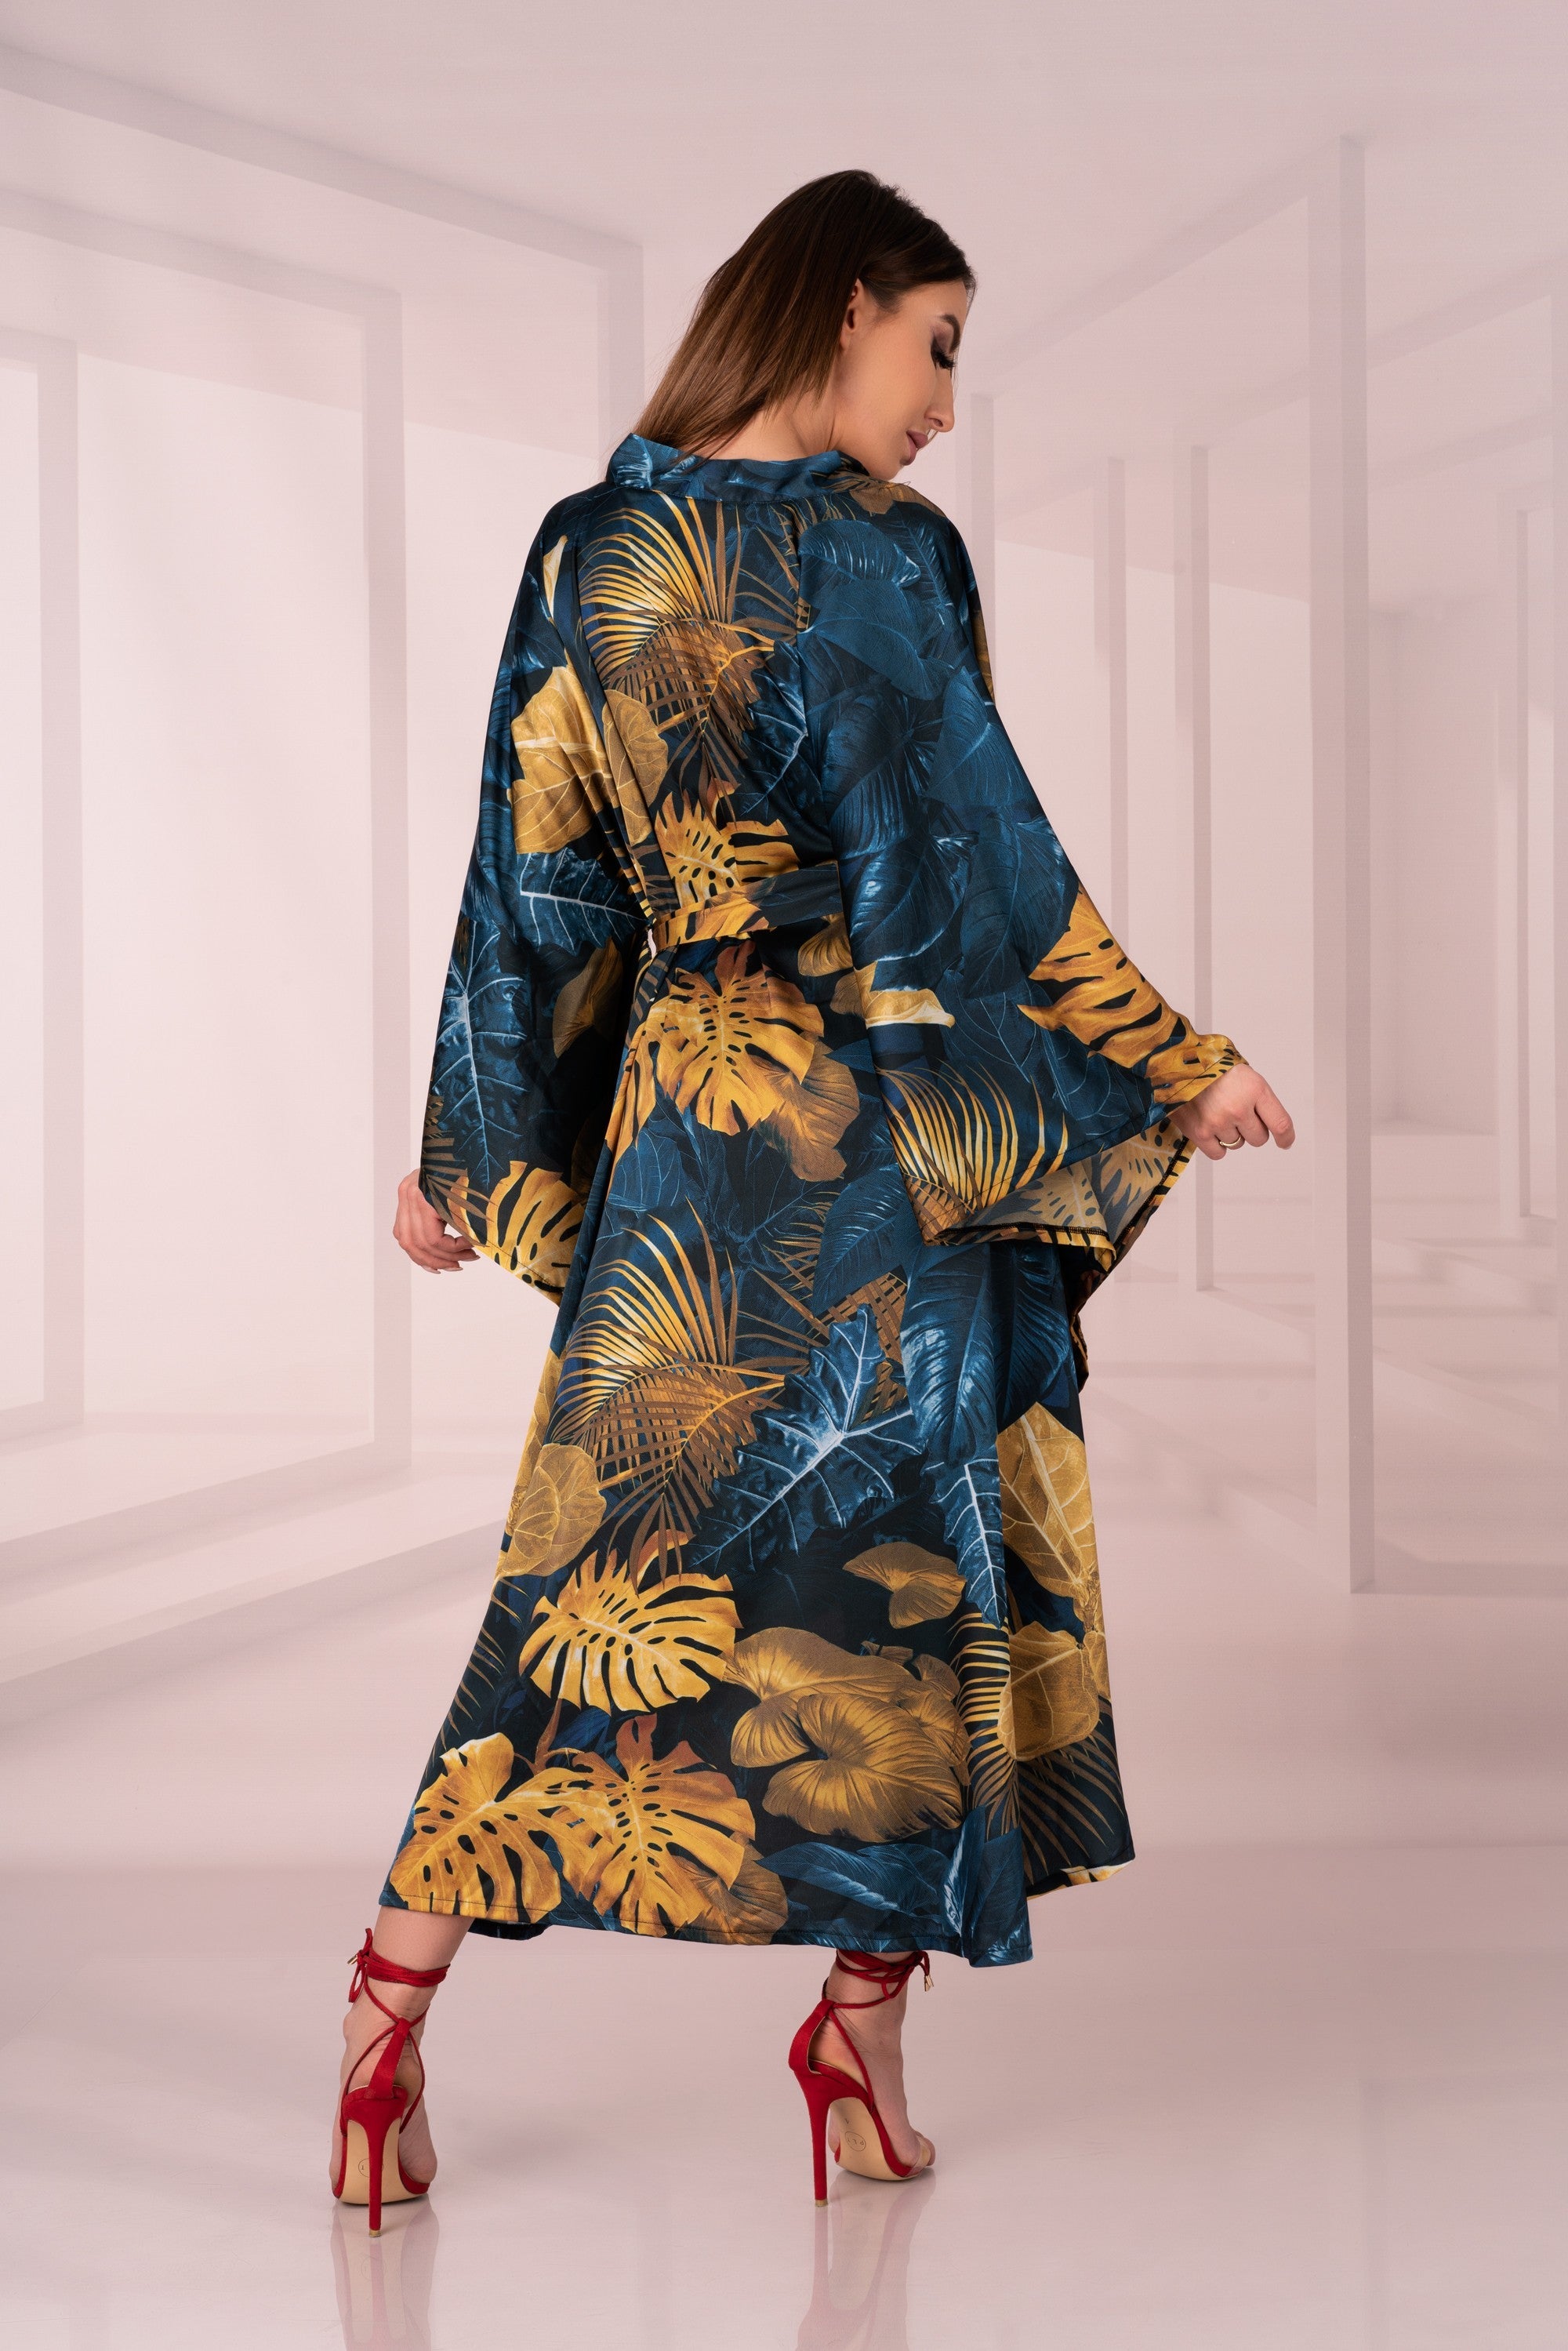 GSA Gift of Handis Aquareel Collection Dressing Gown